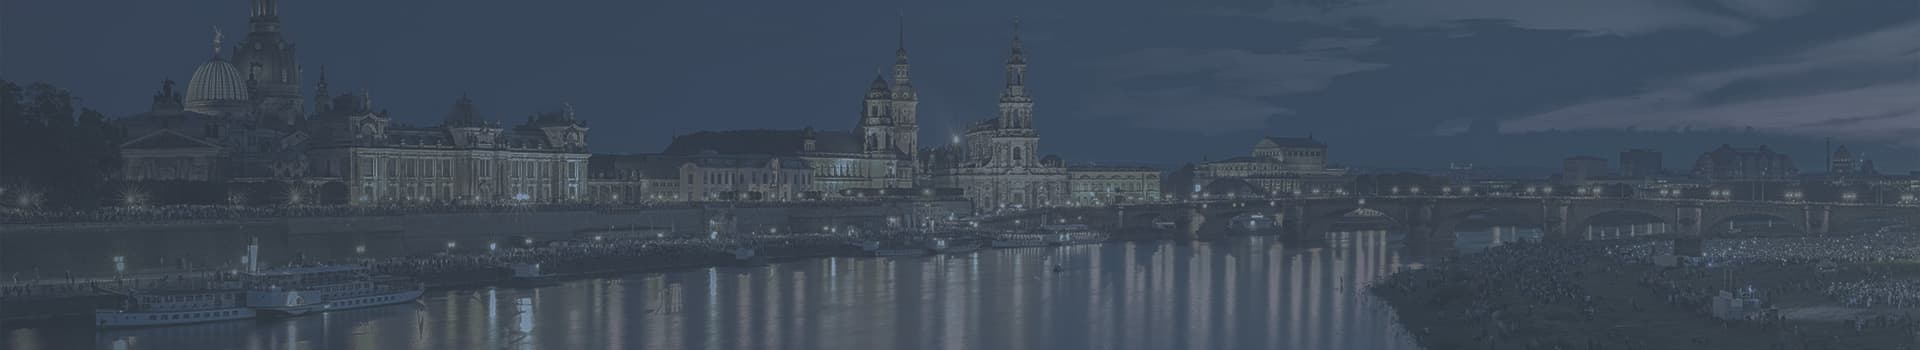 Dresden Canaletto-Blick am Abend